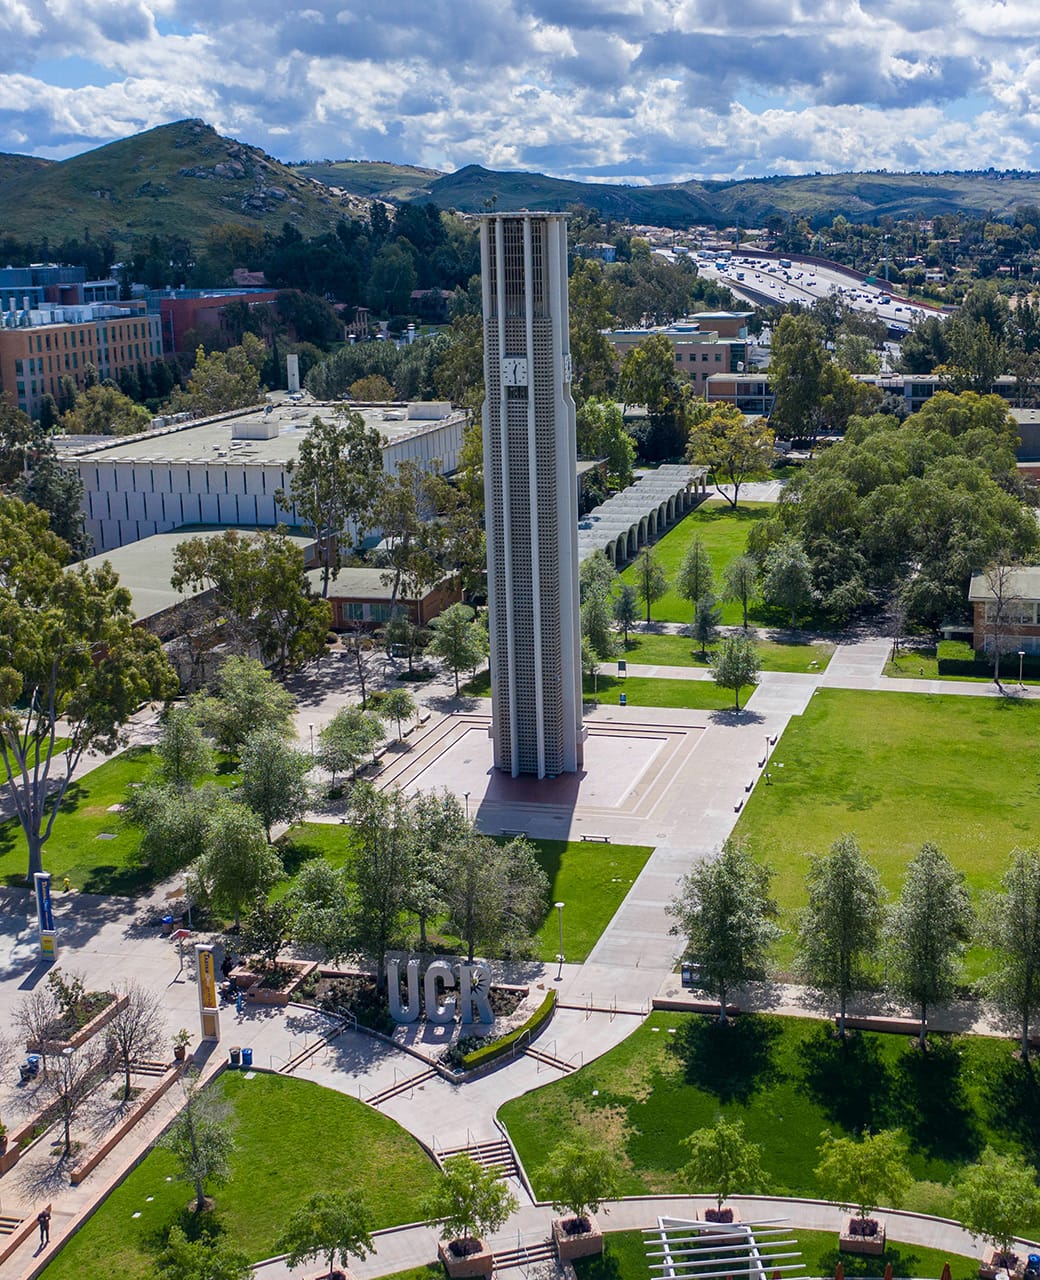 Aerial view of UC Riverside campus with bell tower and UCR letters